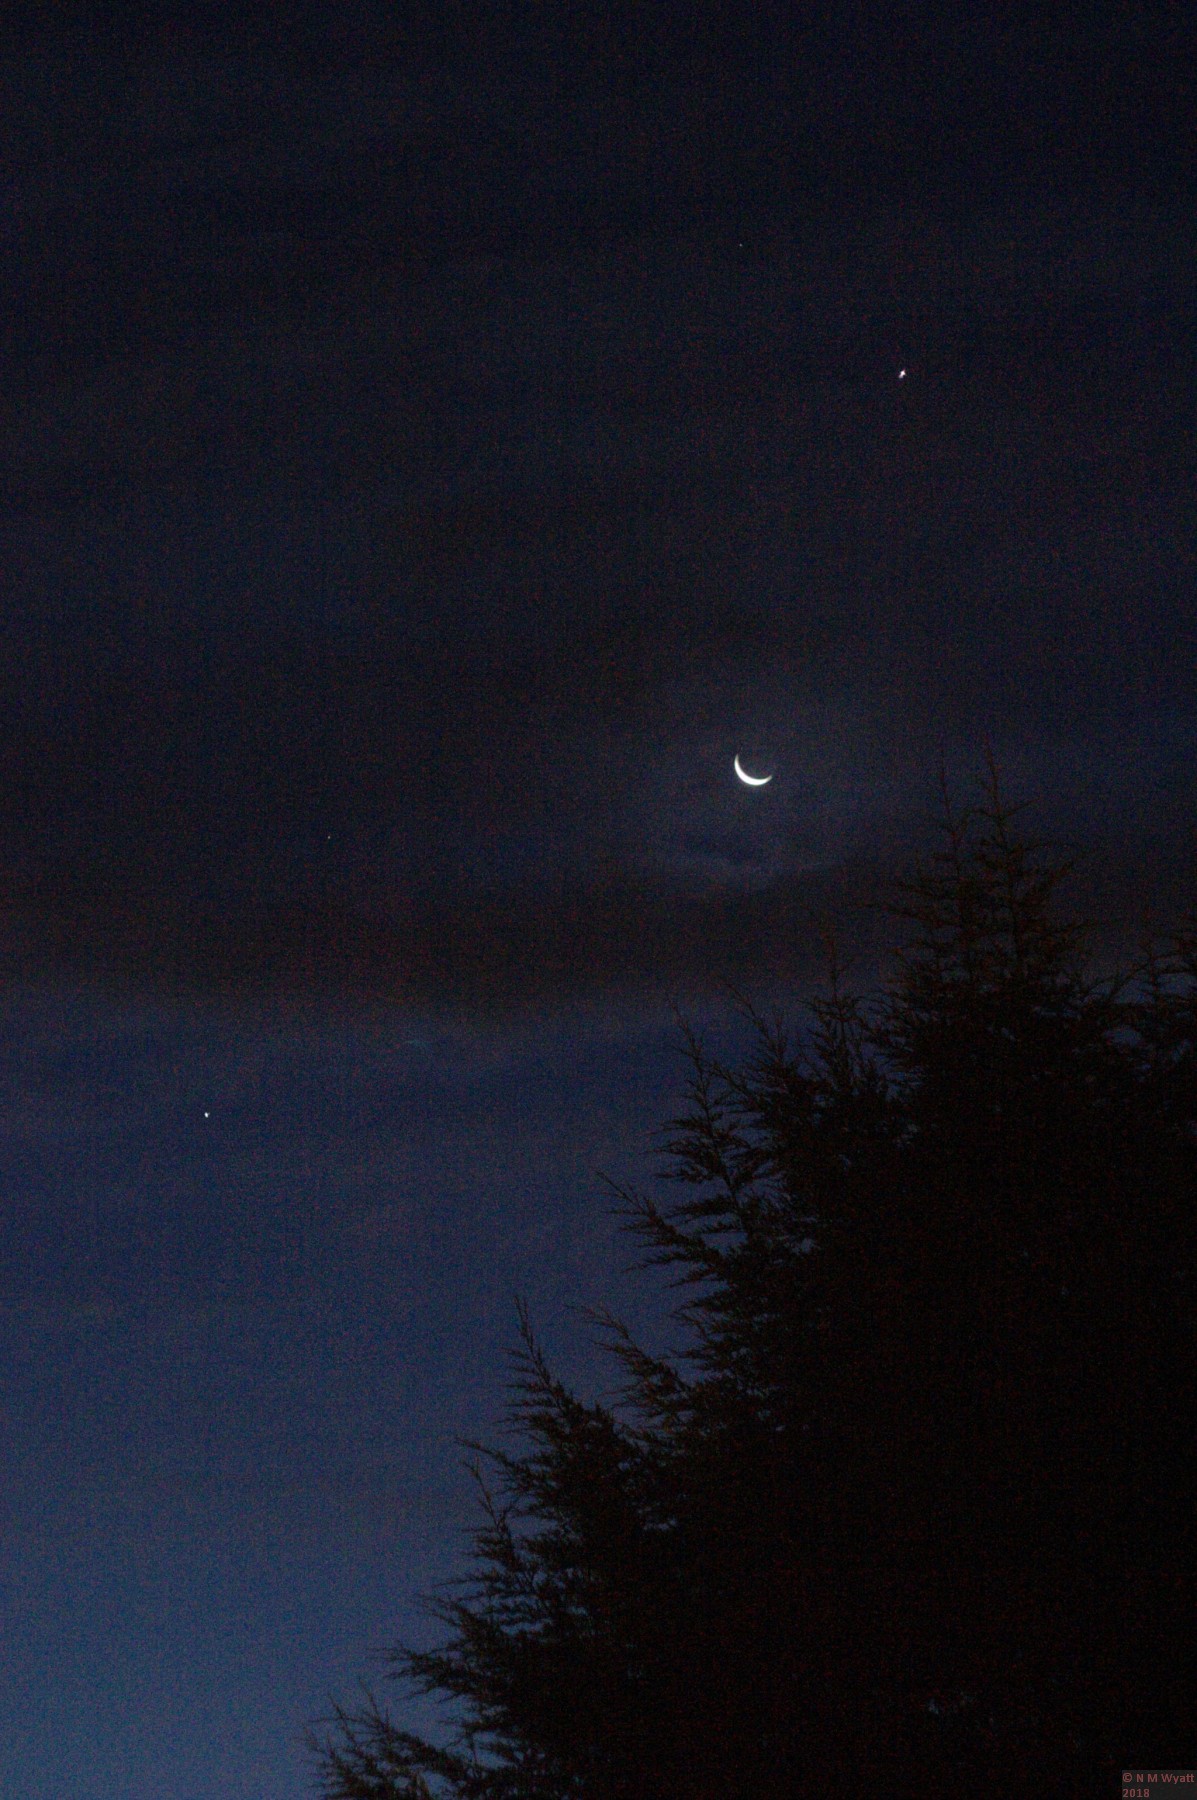 The conjunction of Mars, Jupiter, venus and the Moon